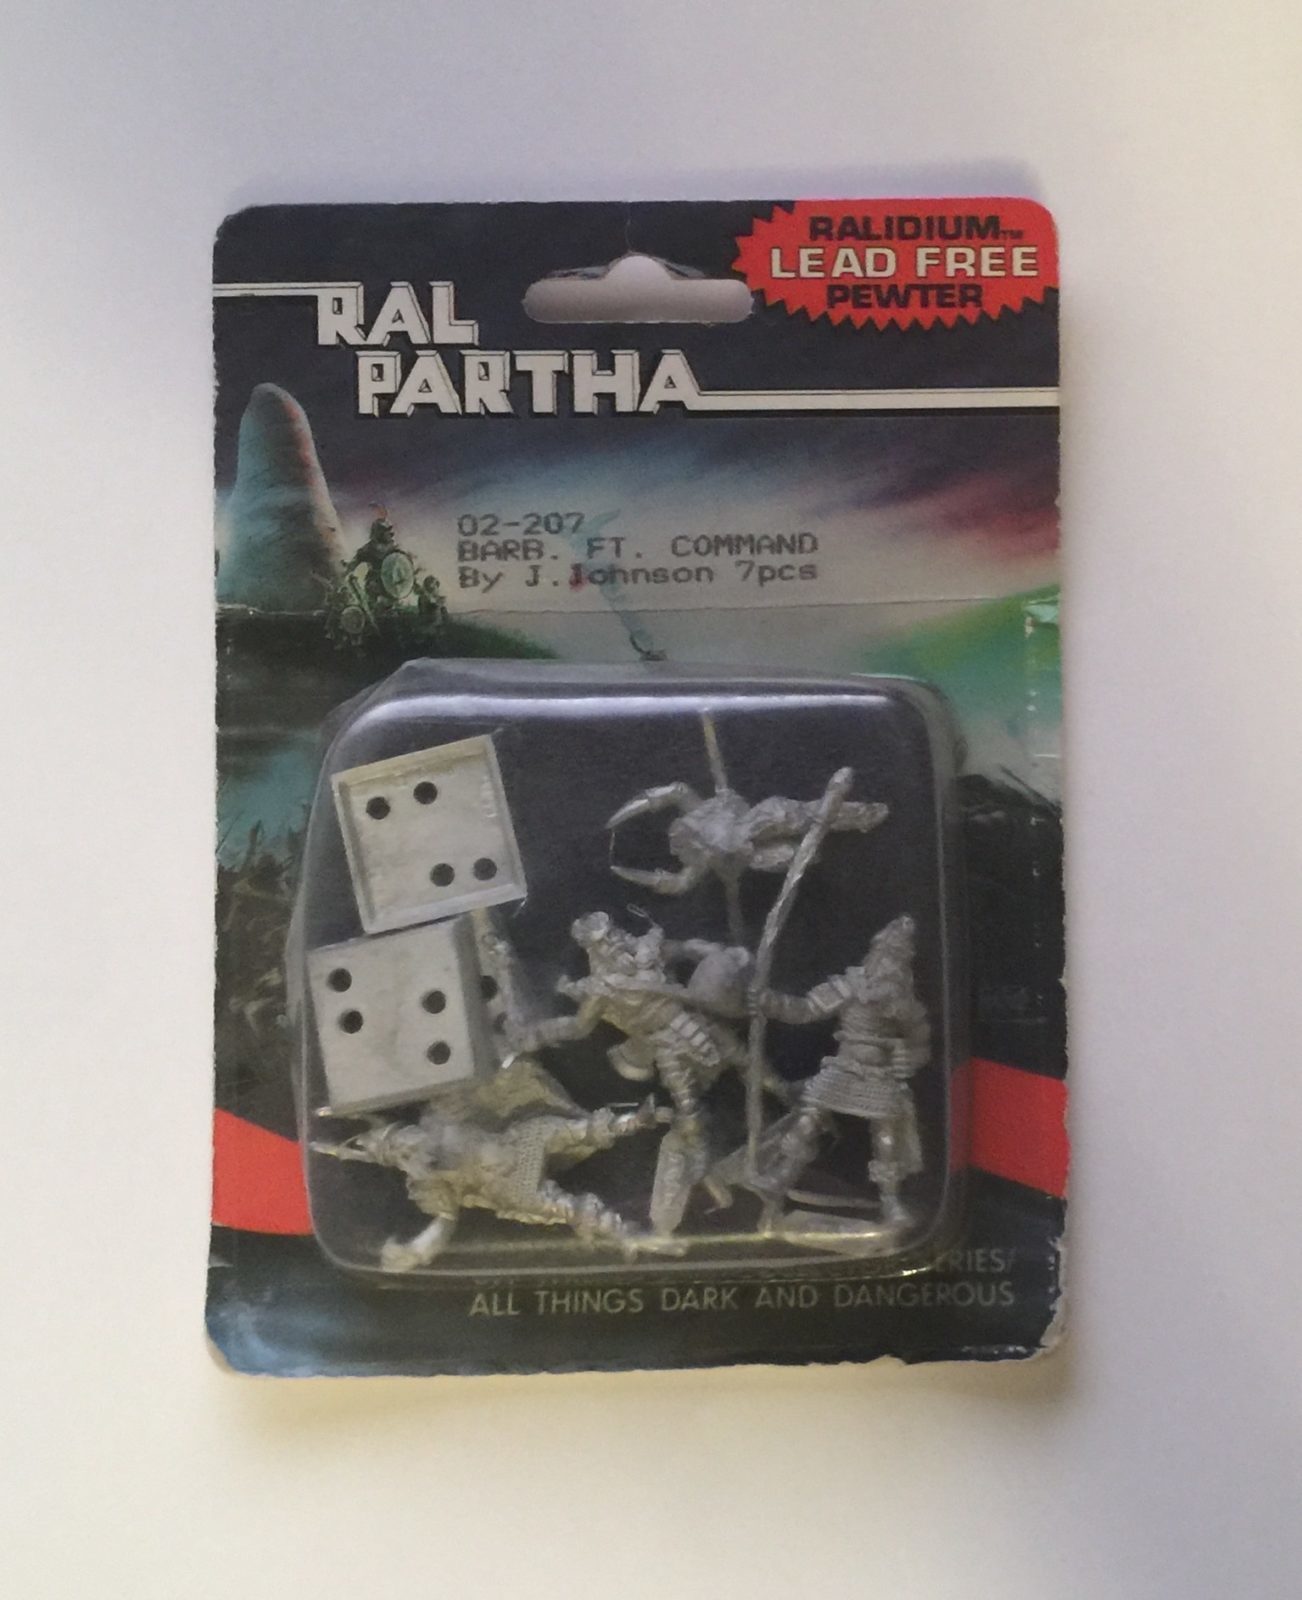 Ral Partha Barb FT Command